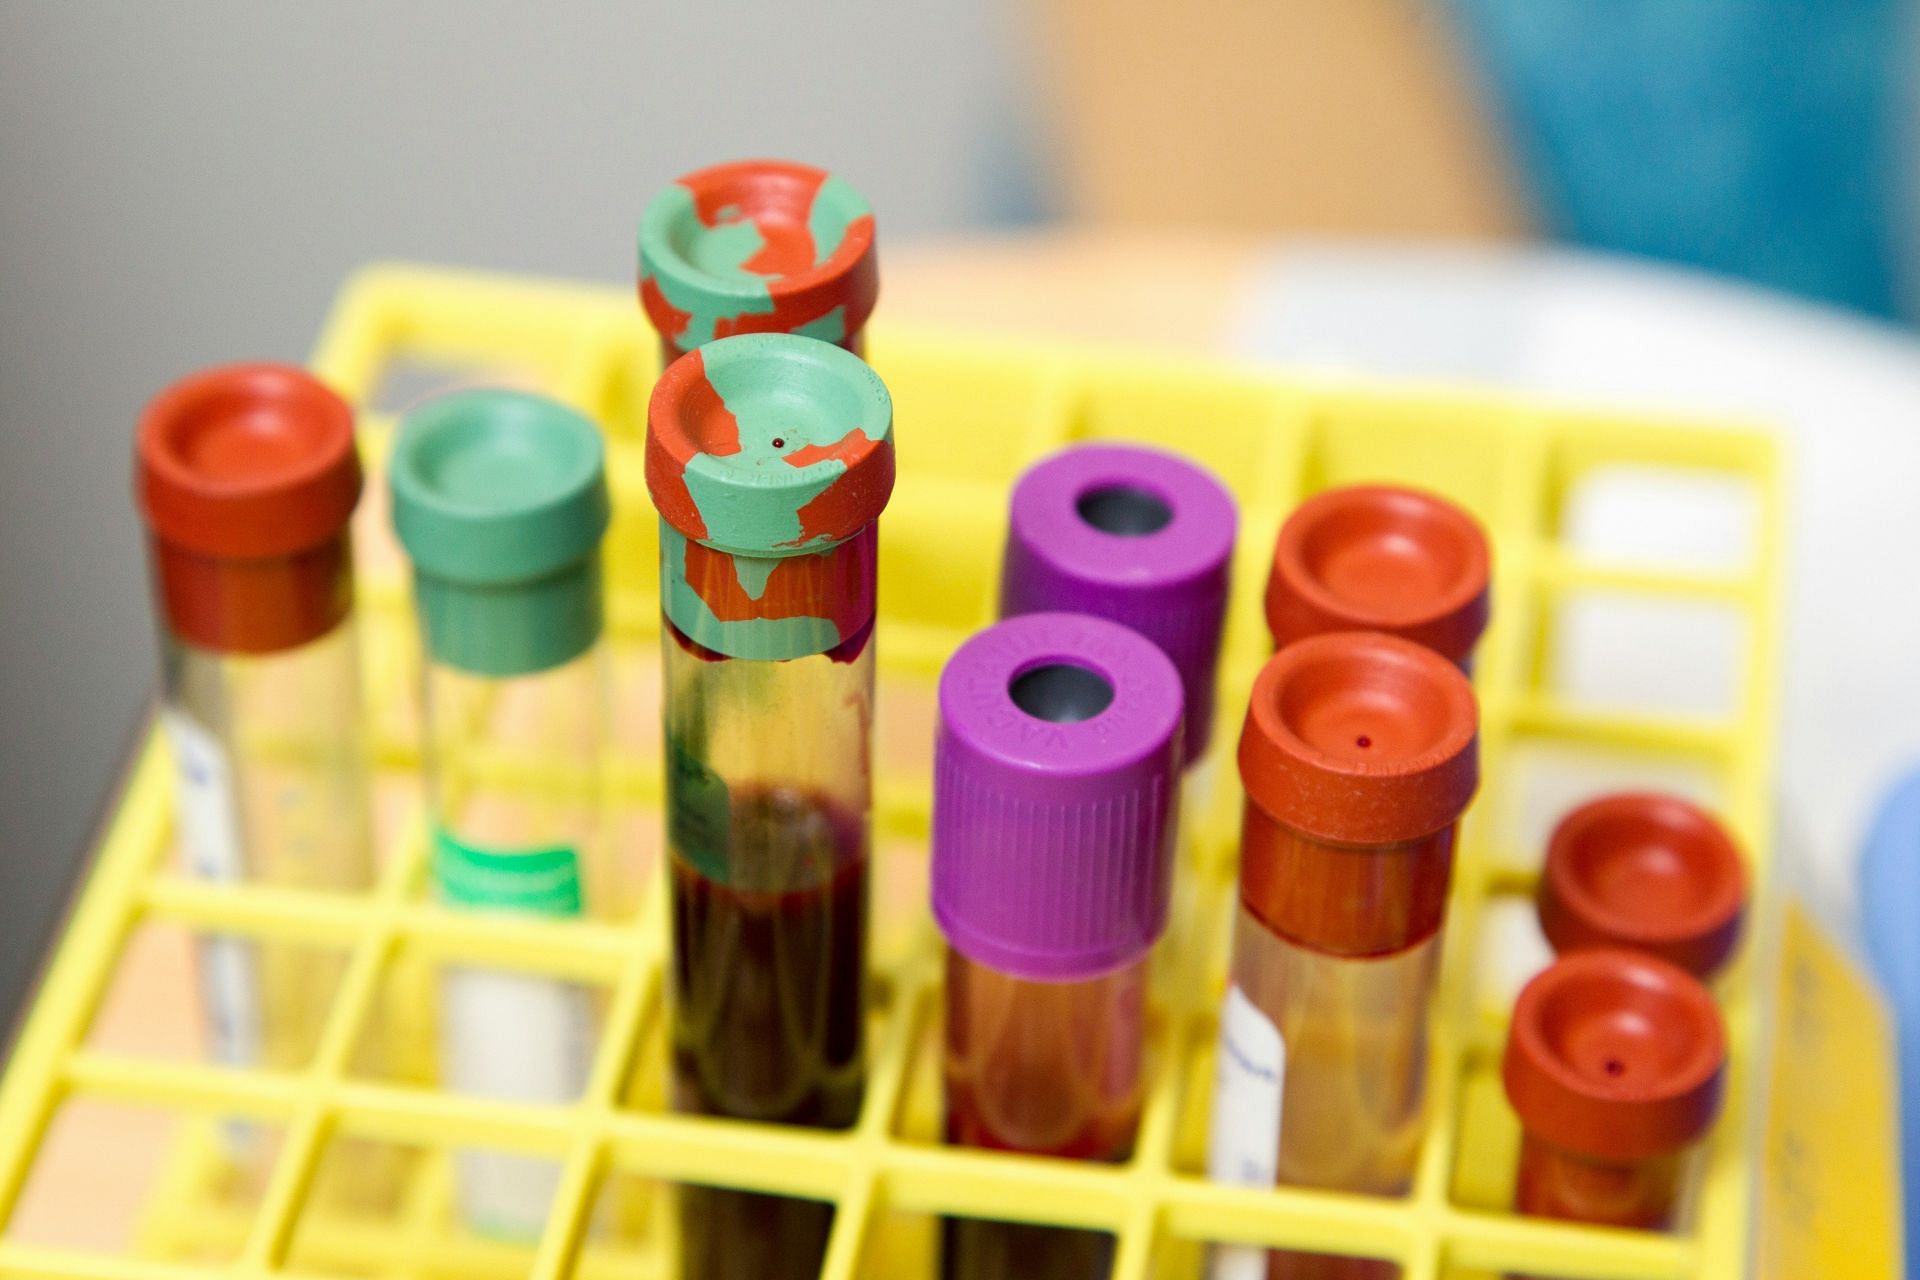 Blood samples to test for alcoholic neuropathy (Image by NCI/Unsplash)